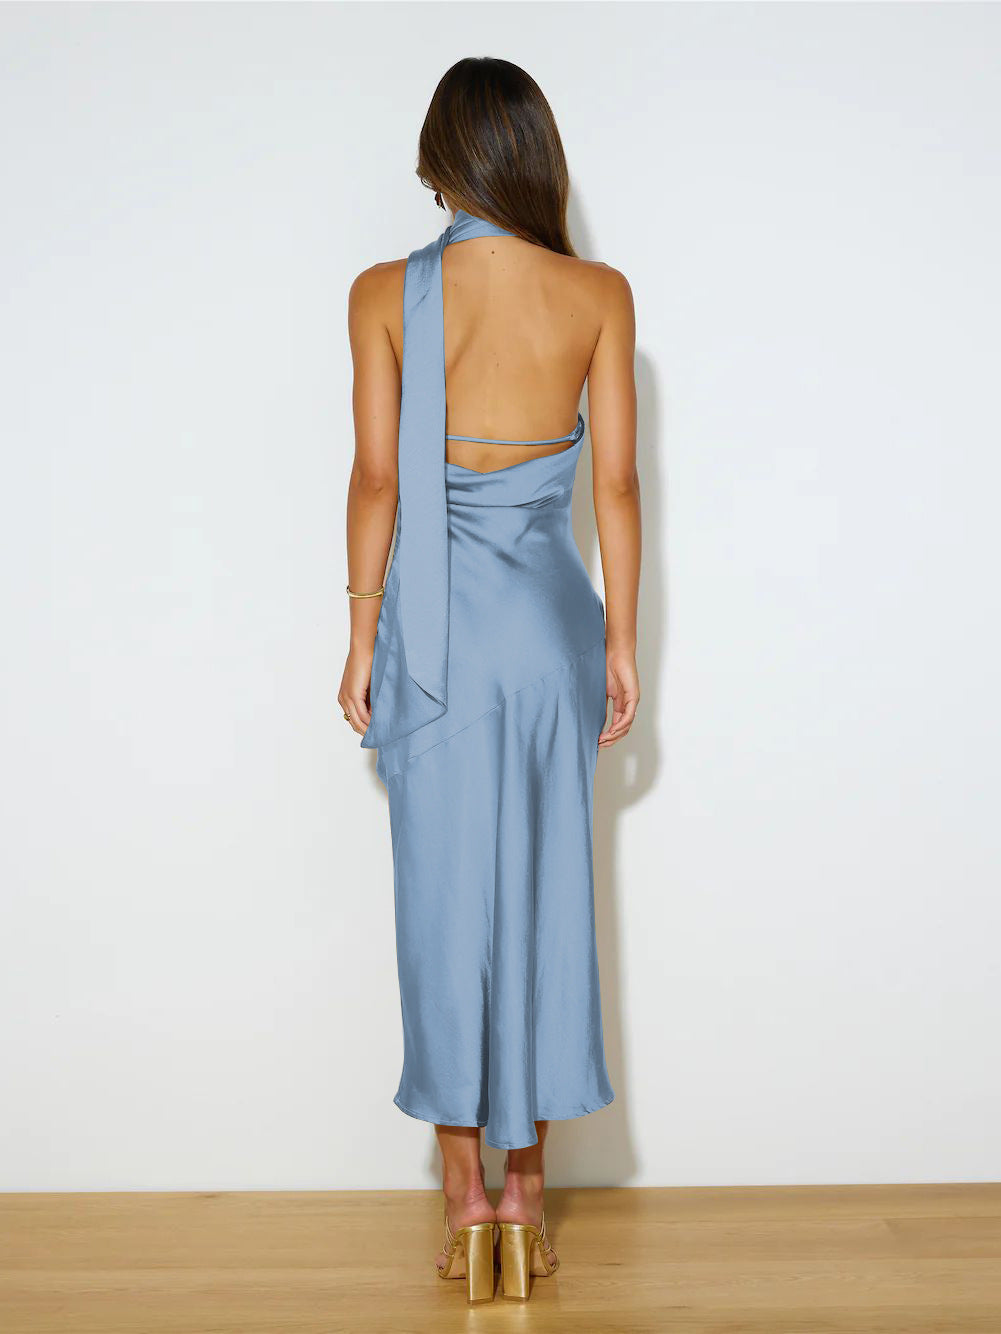 Sexy Satin Backless Evening Dresses-Dresses-GQRZ007杏色-S-Free Shipping Leatheretro